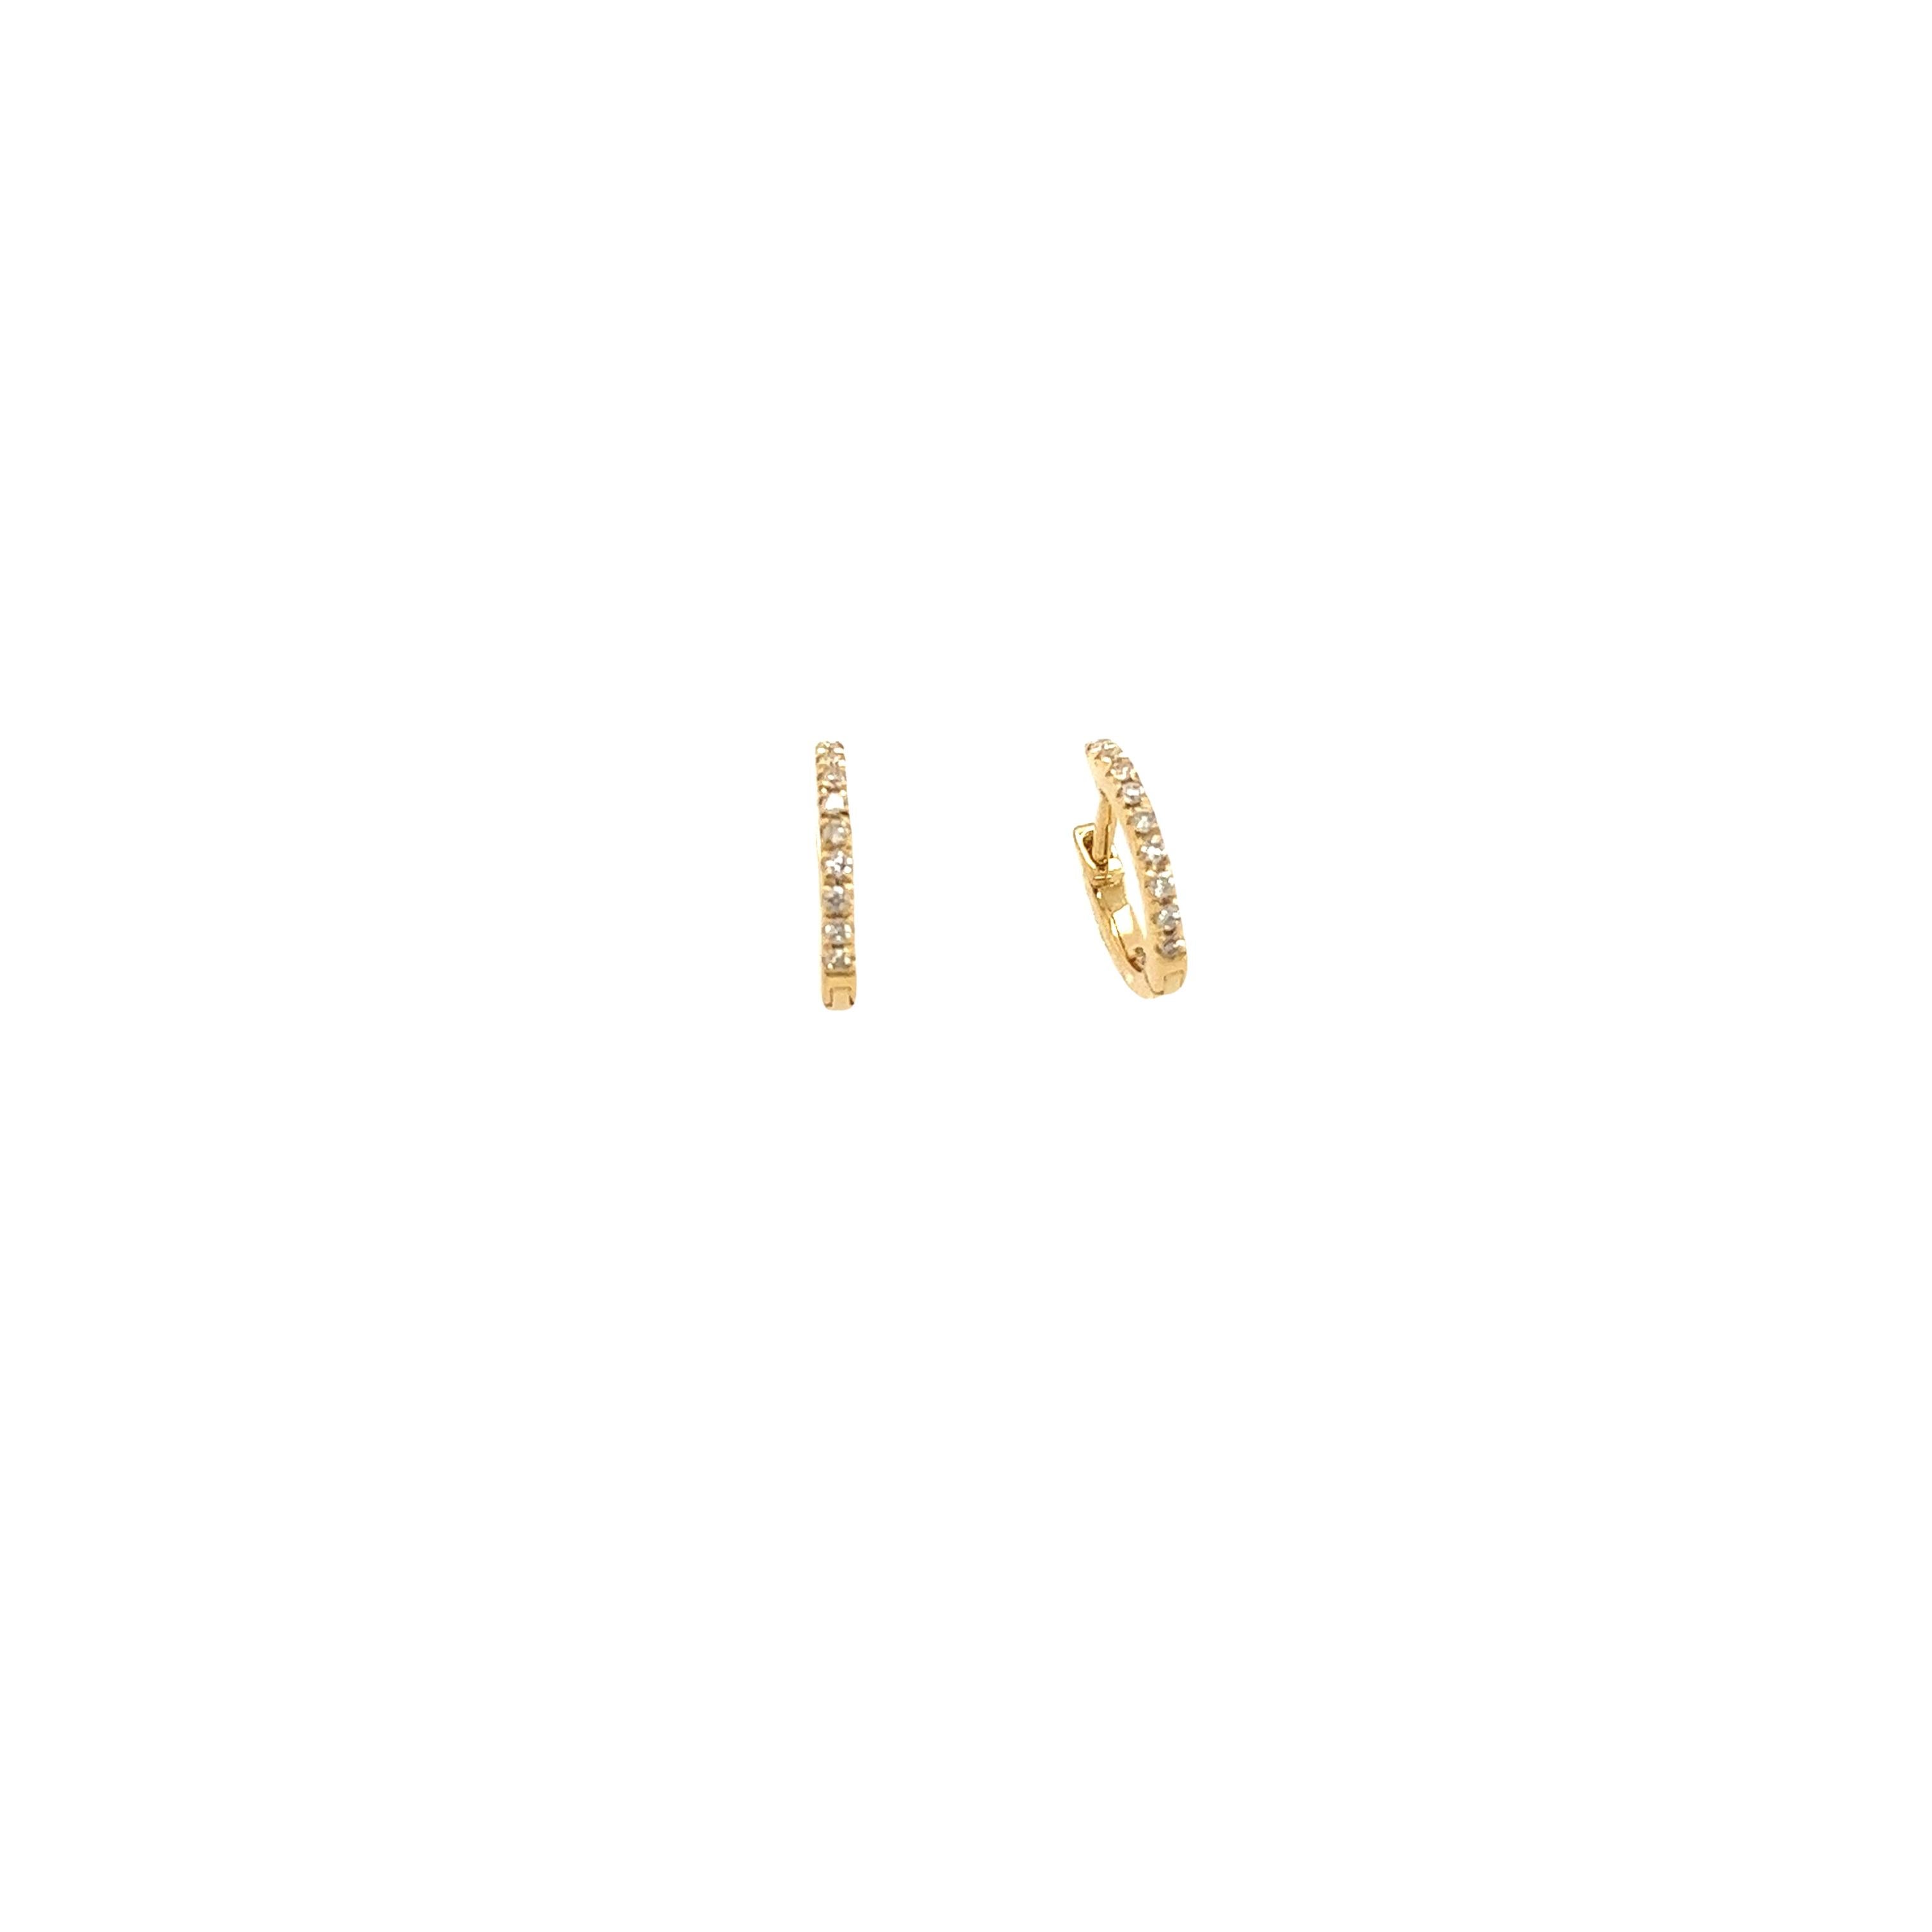 18ct Yellow Gold Diamond Hoop Earrings, Set With 0.08ct Of Round Diamonds, 9mm For Sale 1